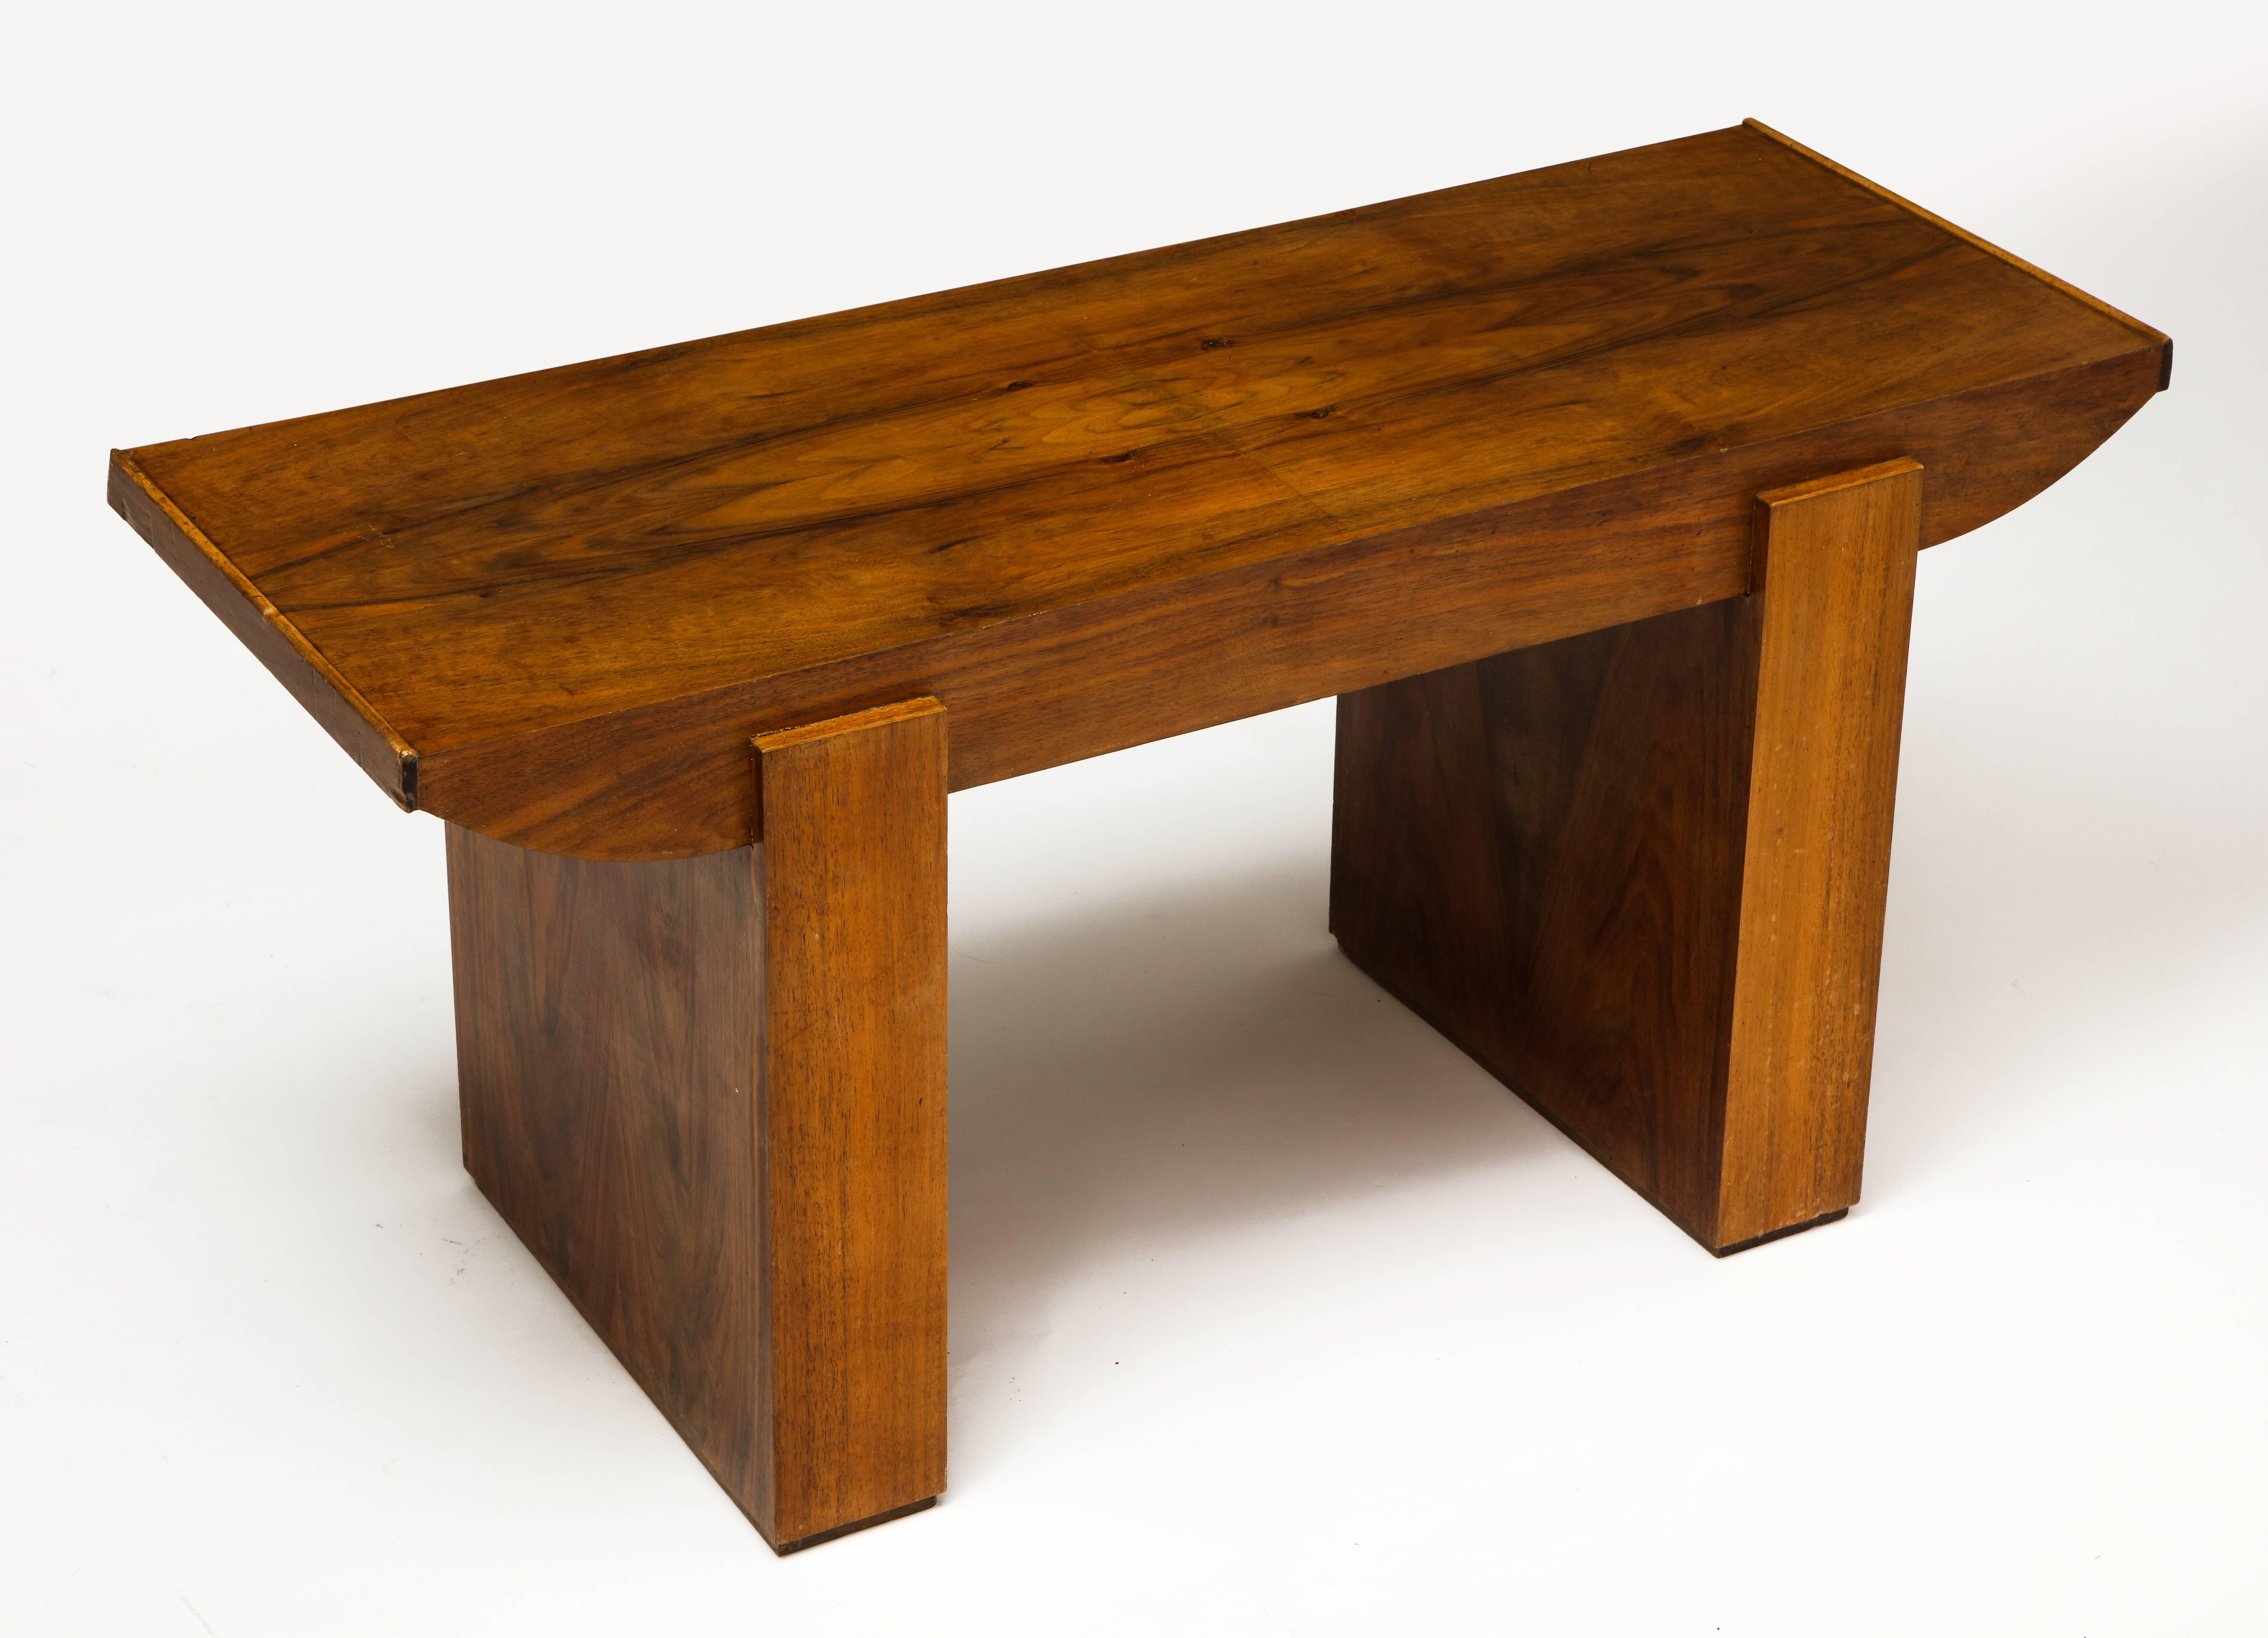 Dominique Attributed Deco Walnut Bench or Table Modernist 1930 Mid Century France

Dimensions:

Length 41 inches, height 19.5 inches, width 15 inches

BGC 11.

Dominique - André Domin (1883-1962) and Marcel Genevrière (1885-1967),
France,